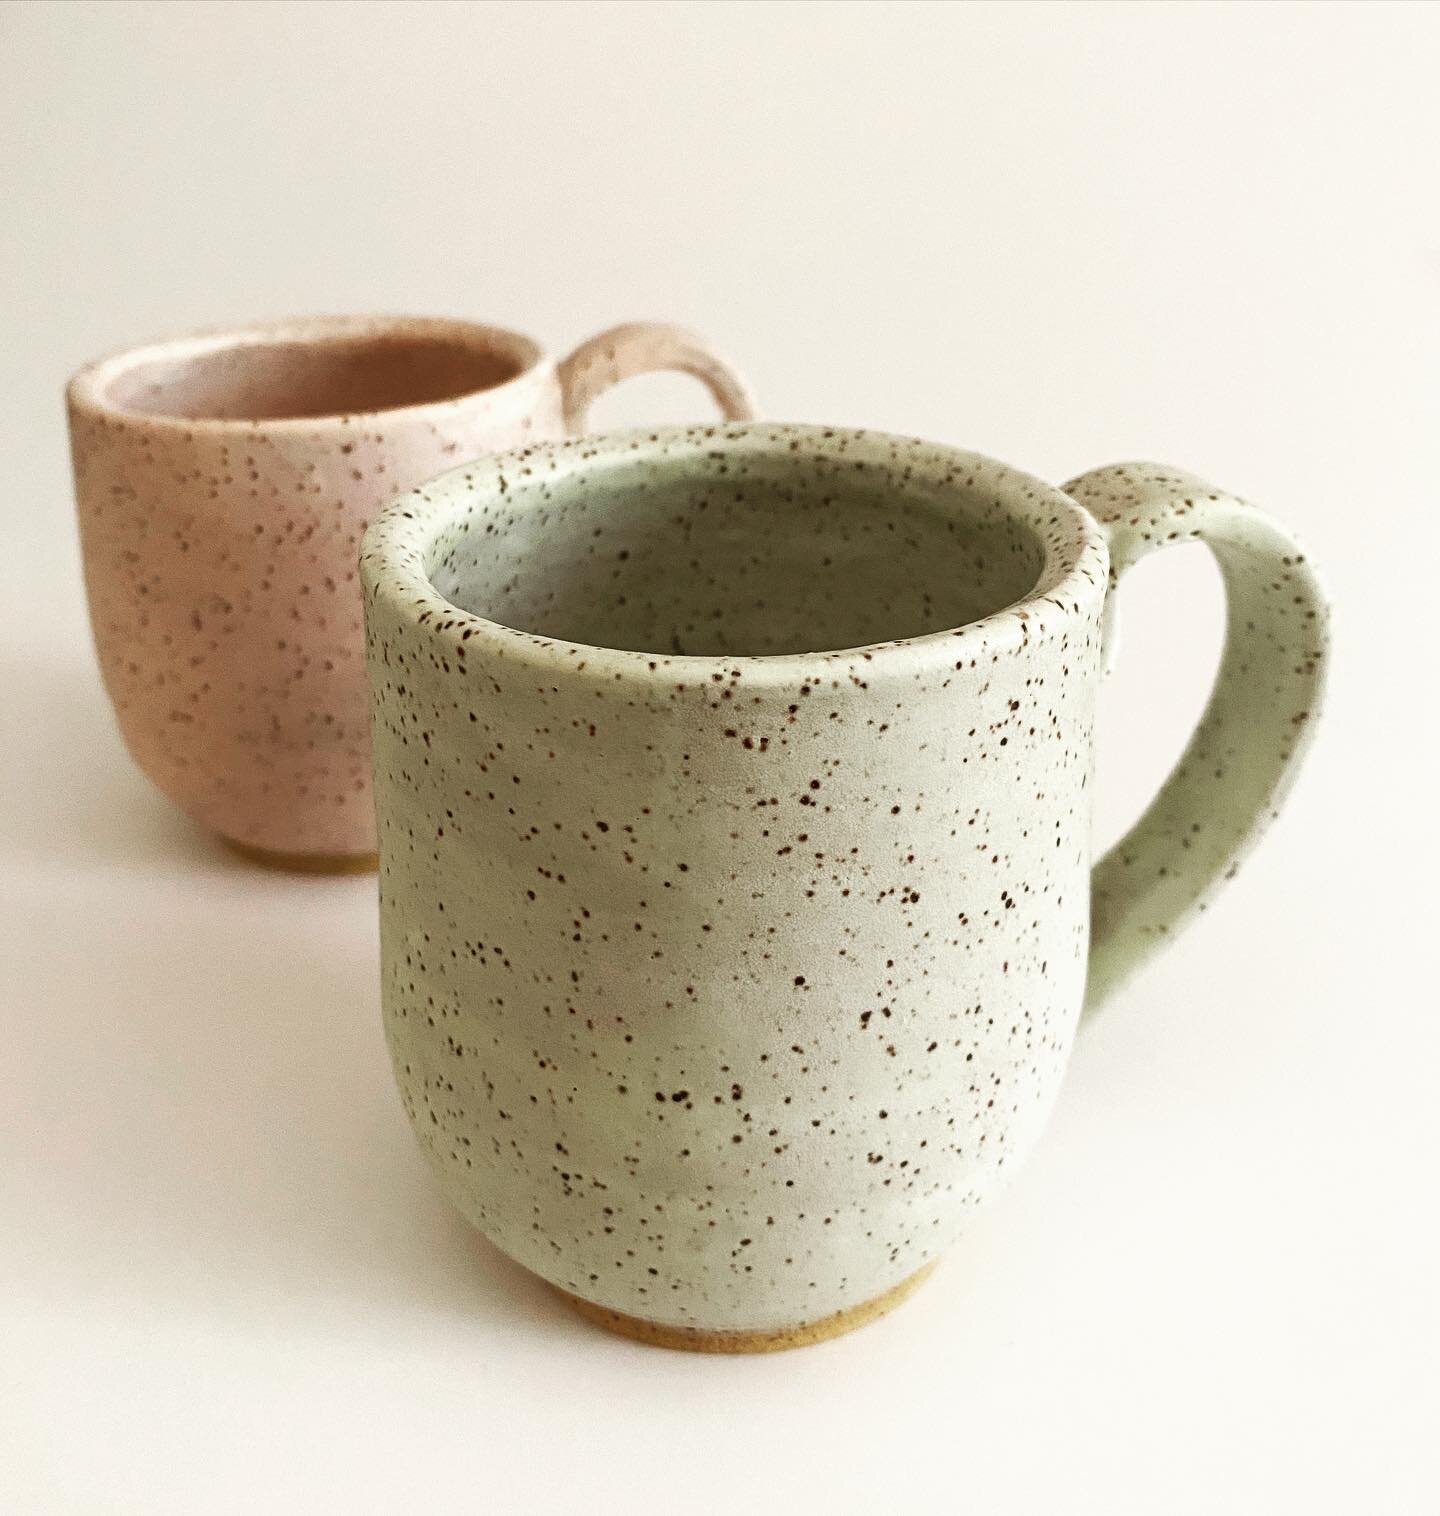 Mint &amp; Rose speckled mugs. Love these two colors together. These will be available for purchase next month during the virtual @crafthermarket 
Happy Friday and Shana Tova ✨
.
.
.
.
.
.
#handmade #wheelthrown #pottery #speckled #mugsonmugs #coffee